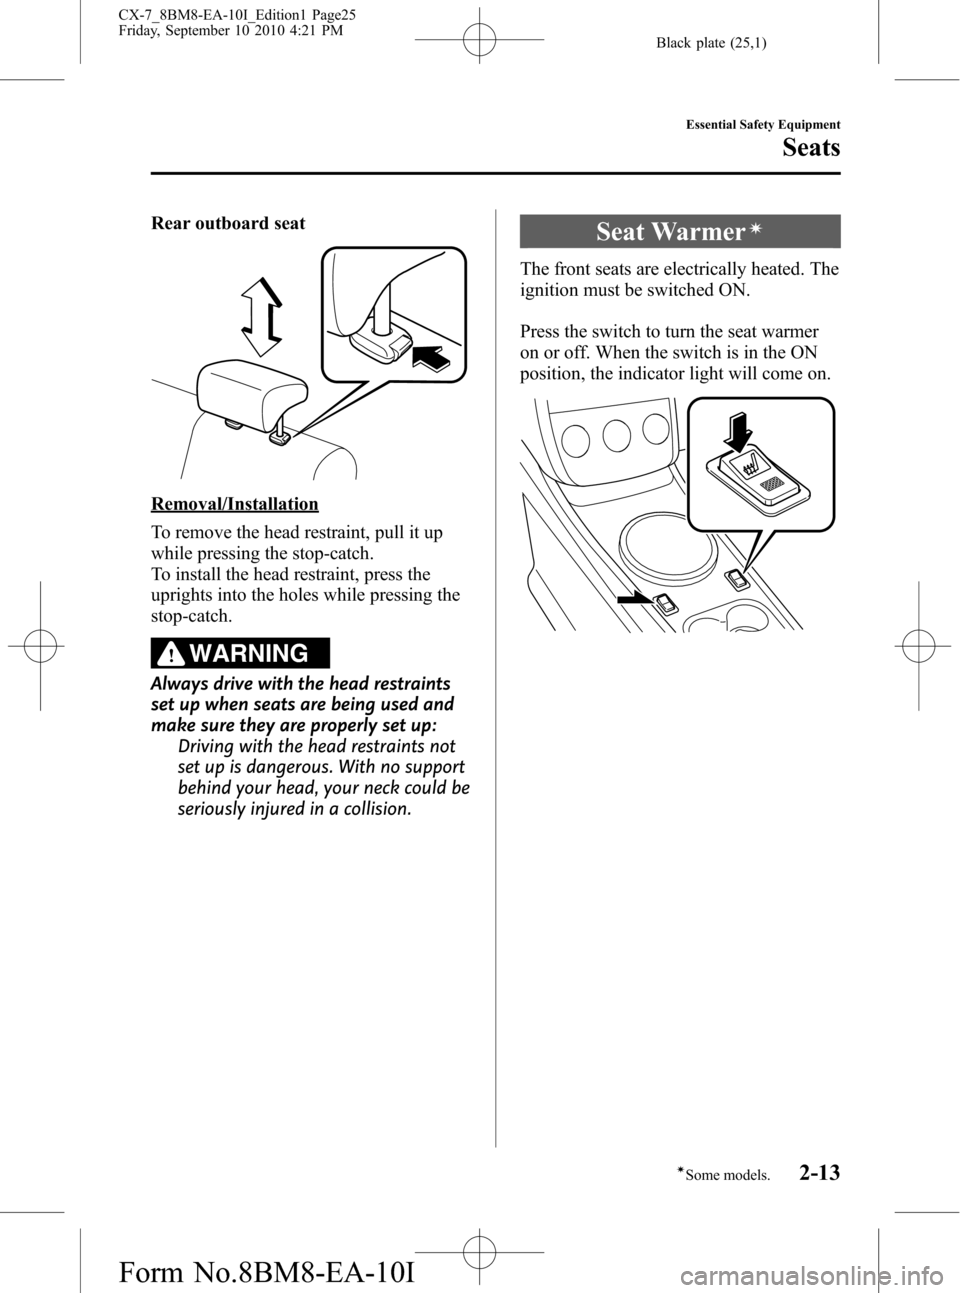 MAZDA MODEL CX-7 2011   (in English) Owners Manual Black plate (25,1)
Rear outboard seat
Removal/Installation
To remove the head restraint, pull it up
while pressing the stop-catch.
To install the head restraint, press the
uprights into the holes whil